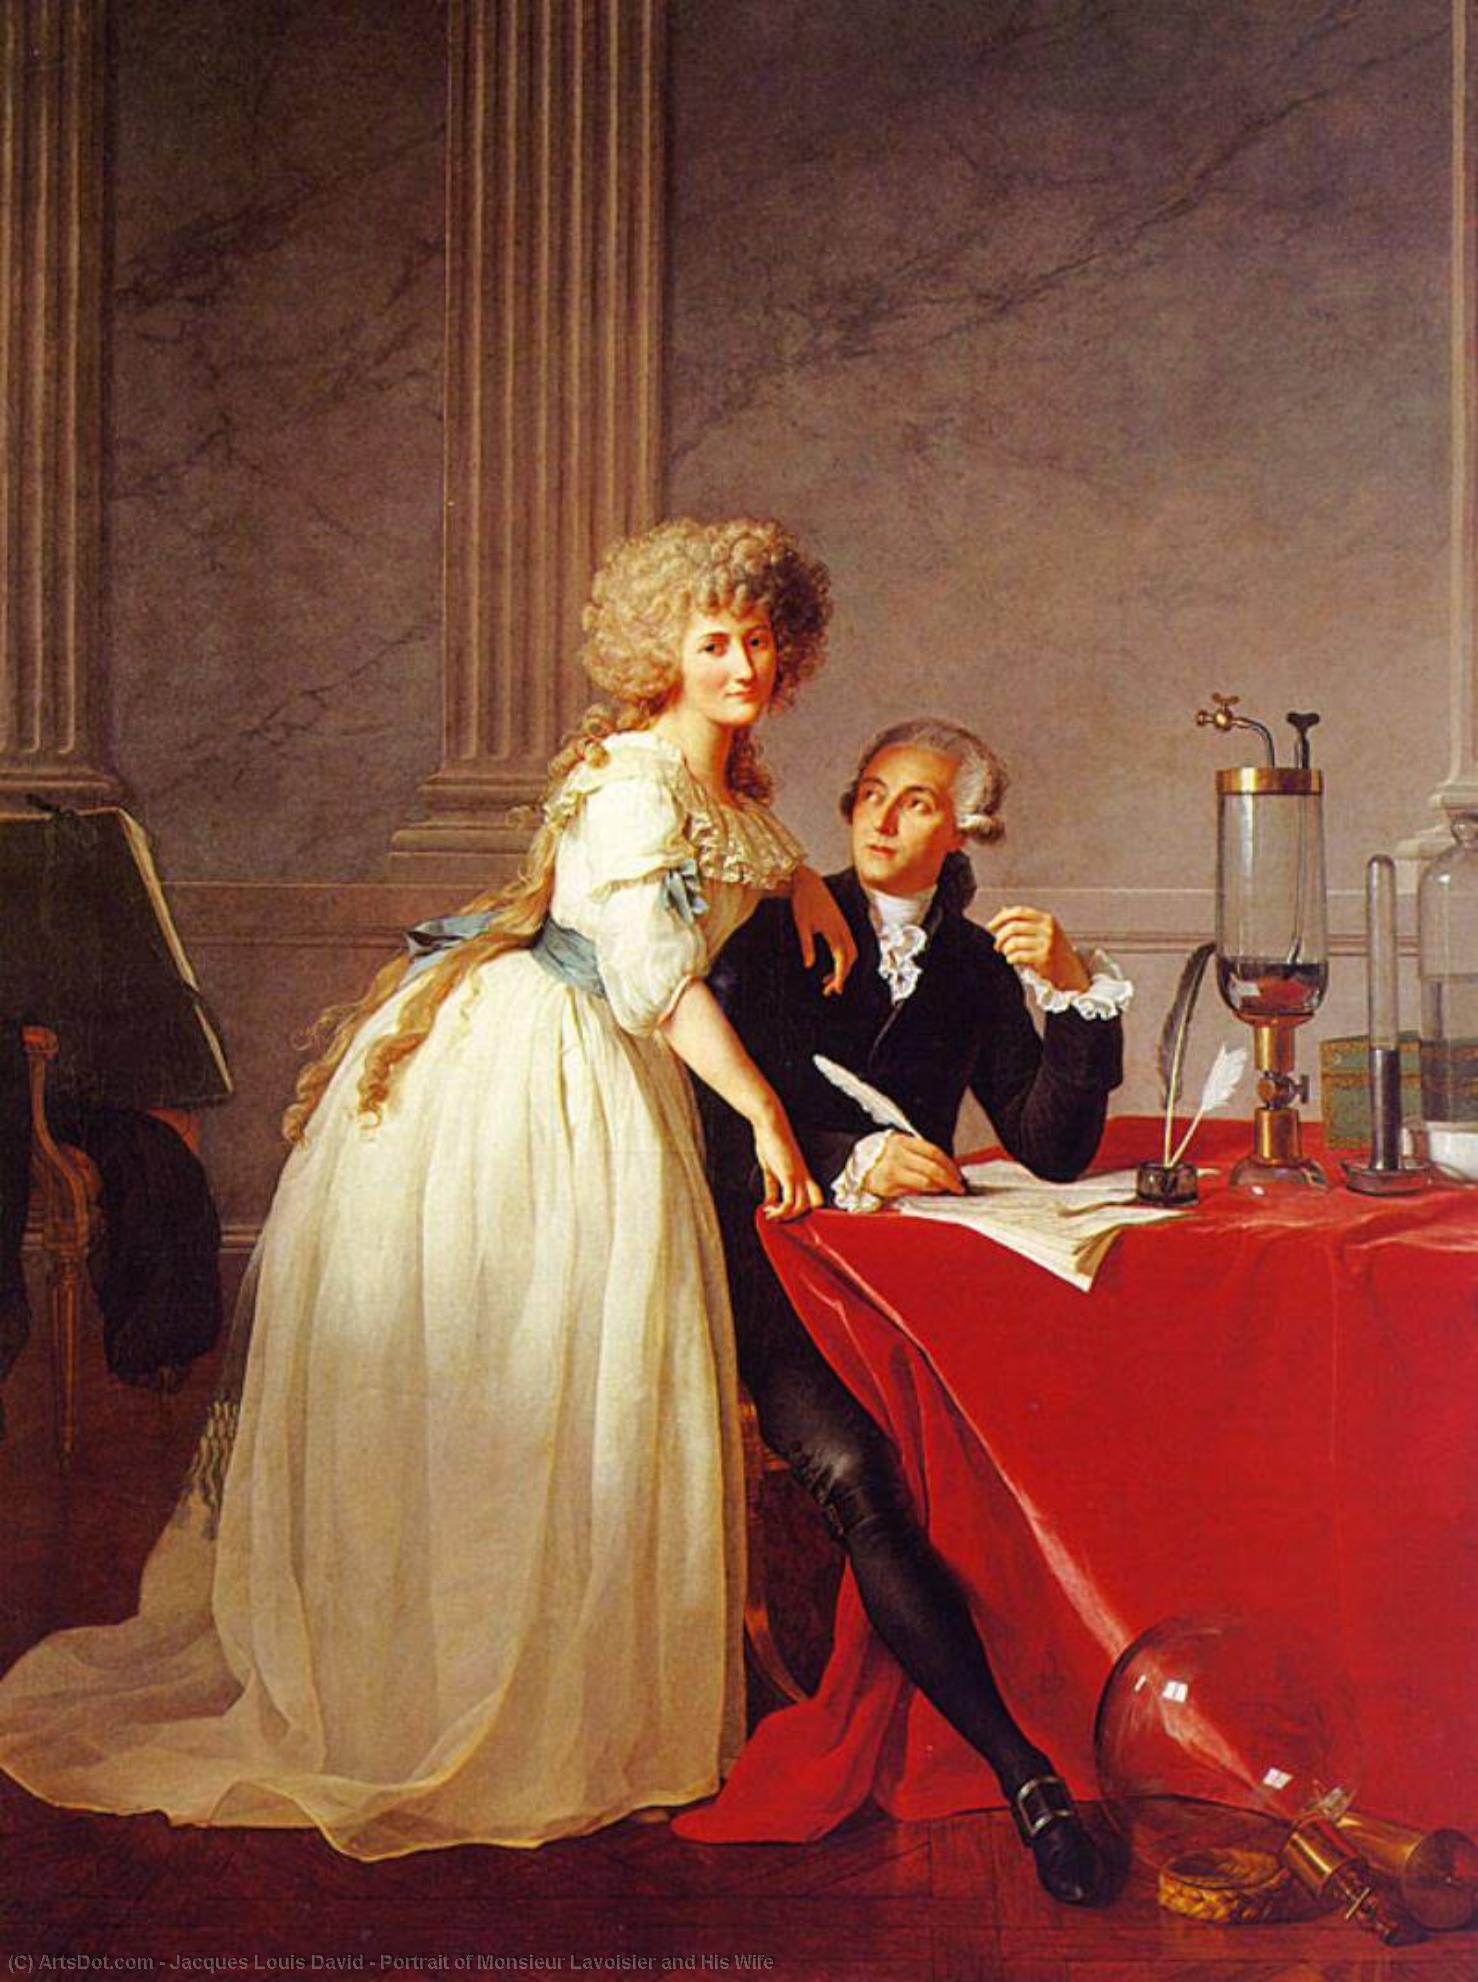 WikiOO.org - 백과 사전 - 회화, 삽화 Jacques Louis David - Portrait of Monsieur Lavoisier and His Wife